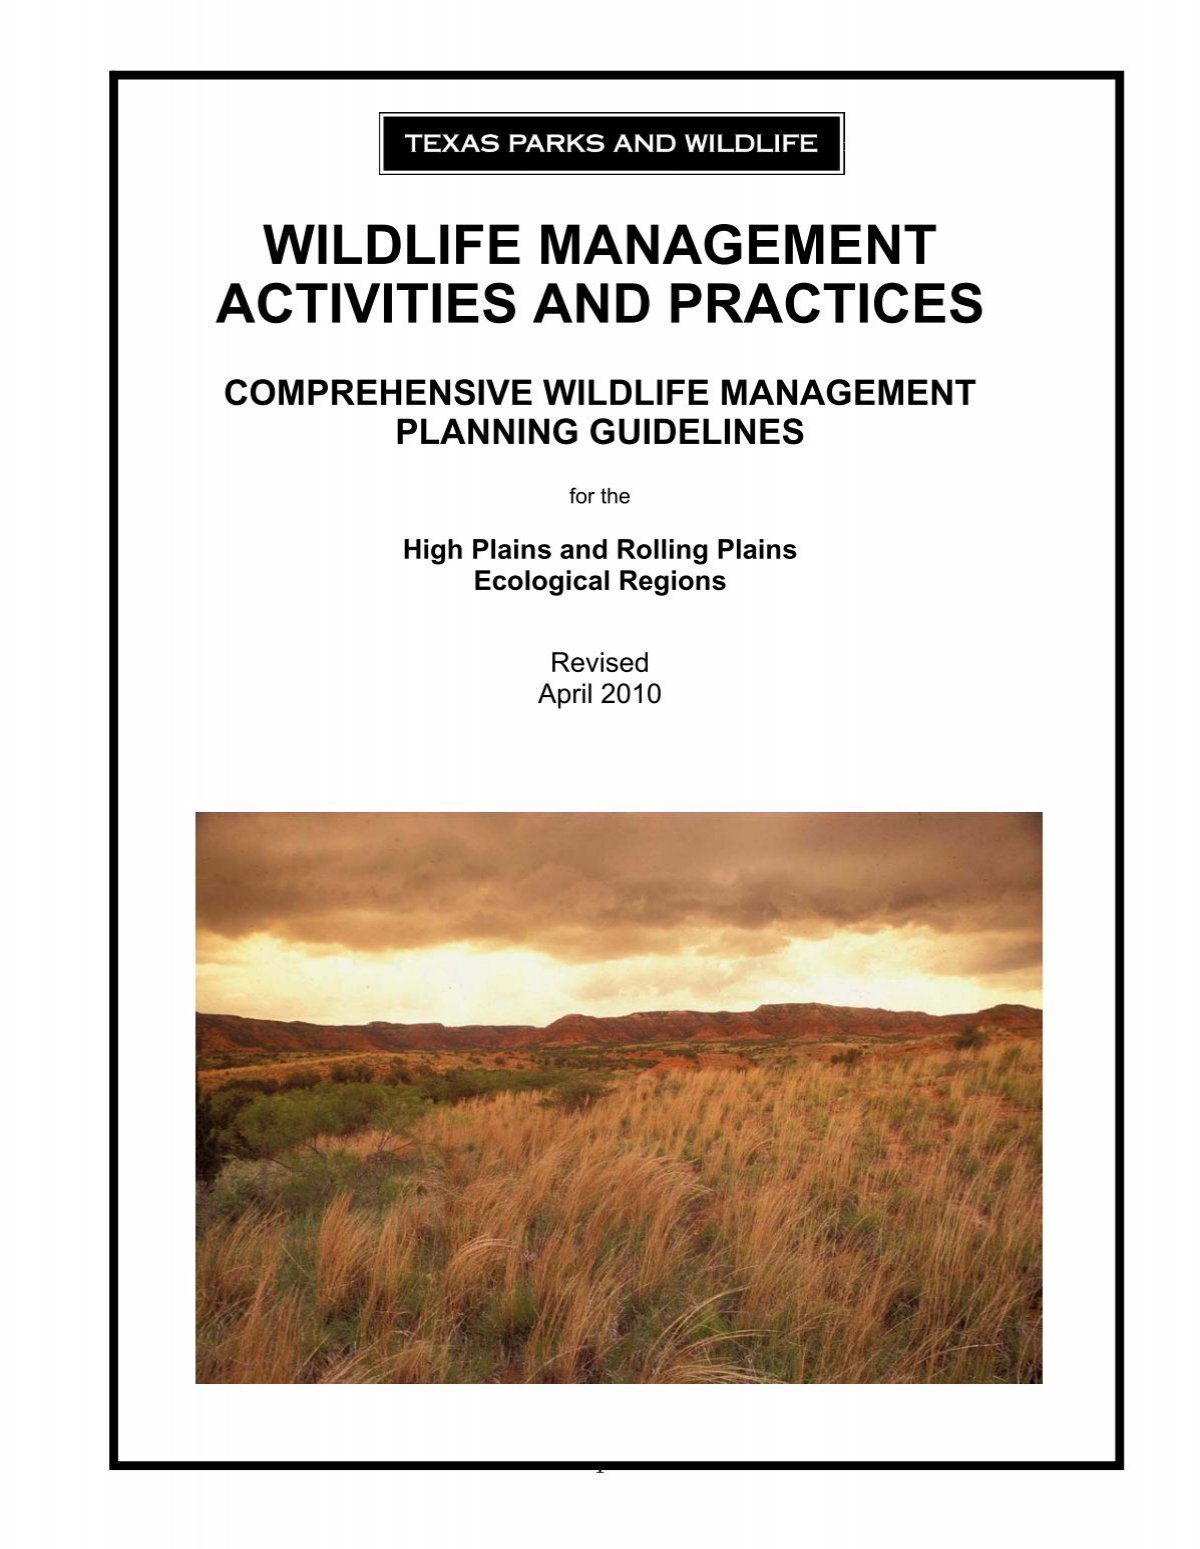 Wildlife Management Activities and Practices - Texas Parks